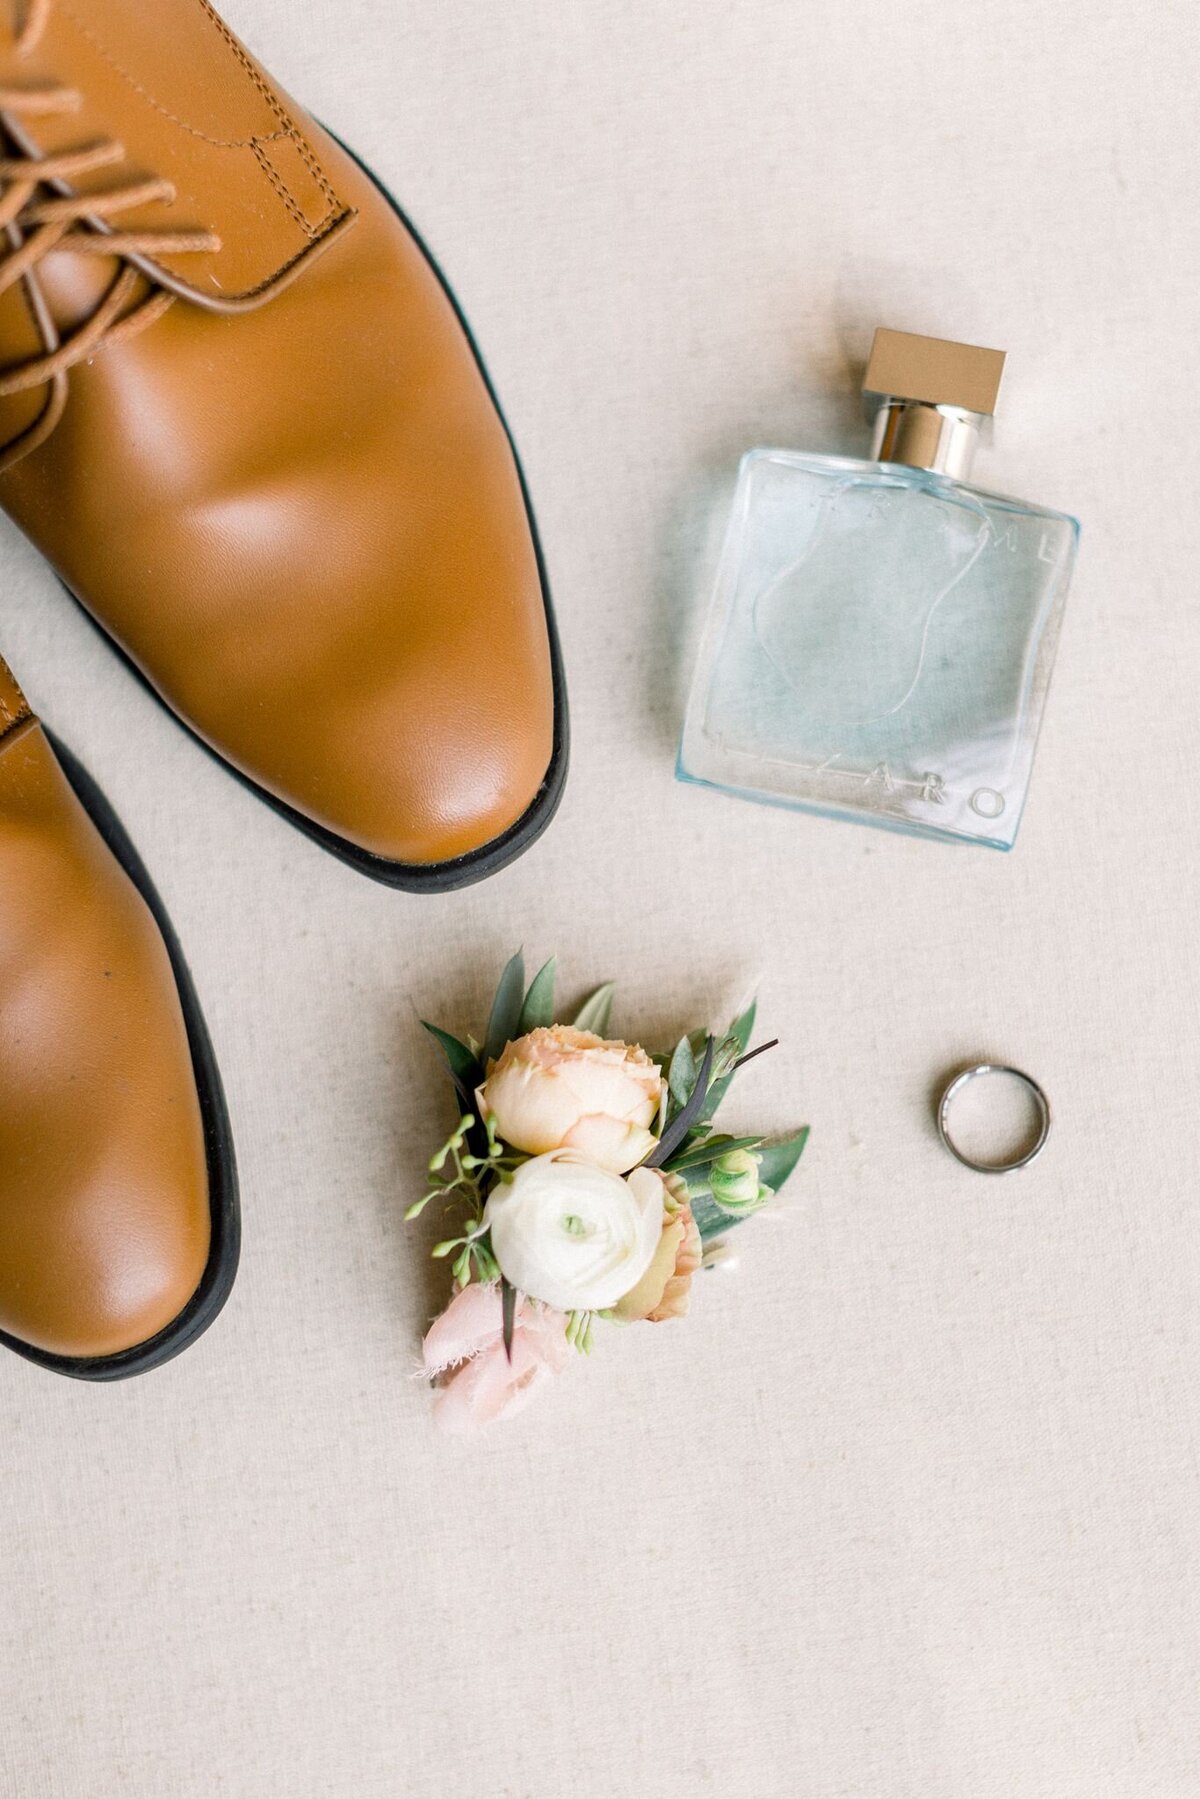 The groom's shoes and boutonniere.